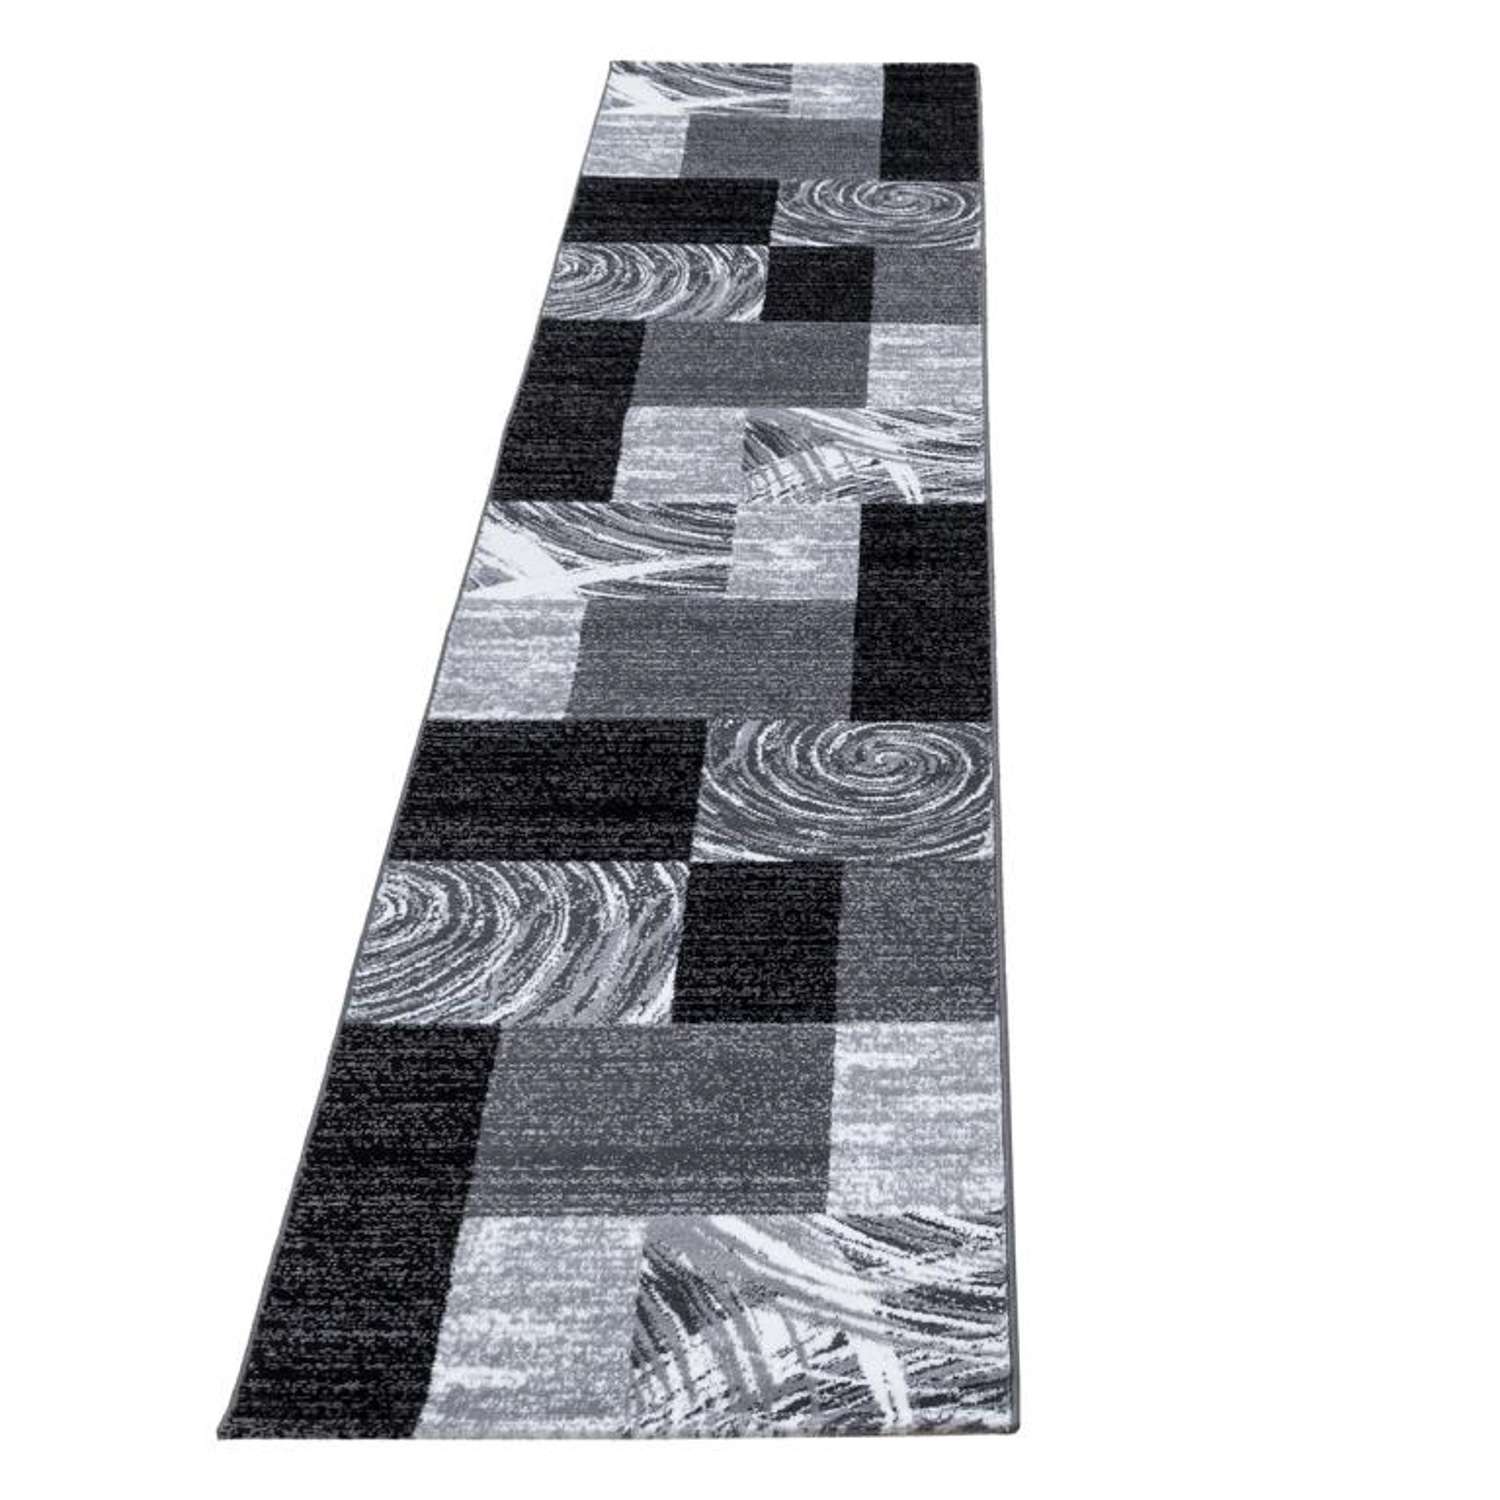 Low-Pile Rug - Paola - runner